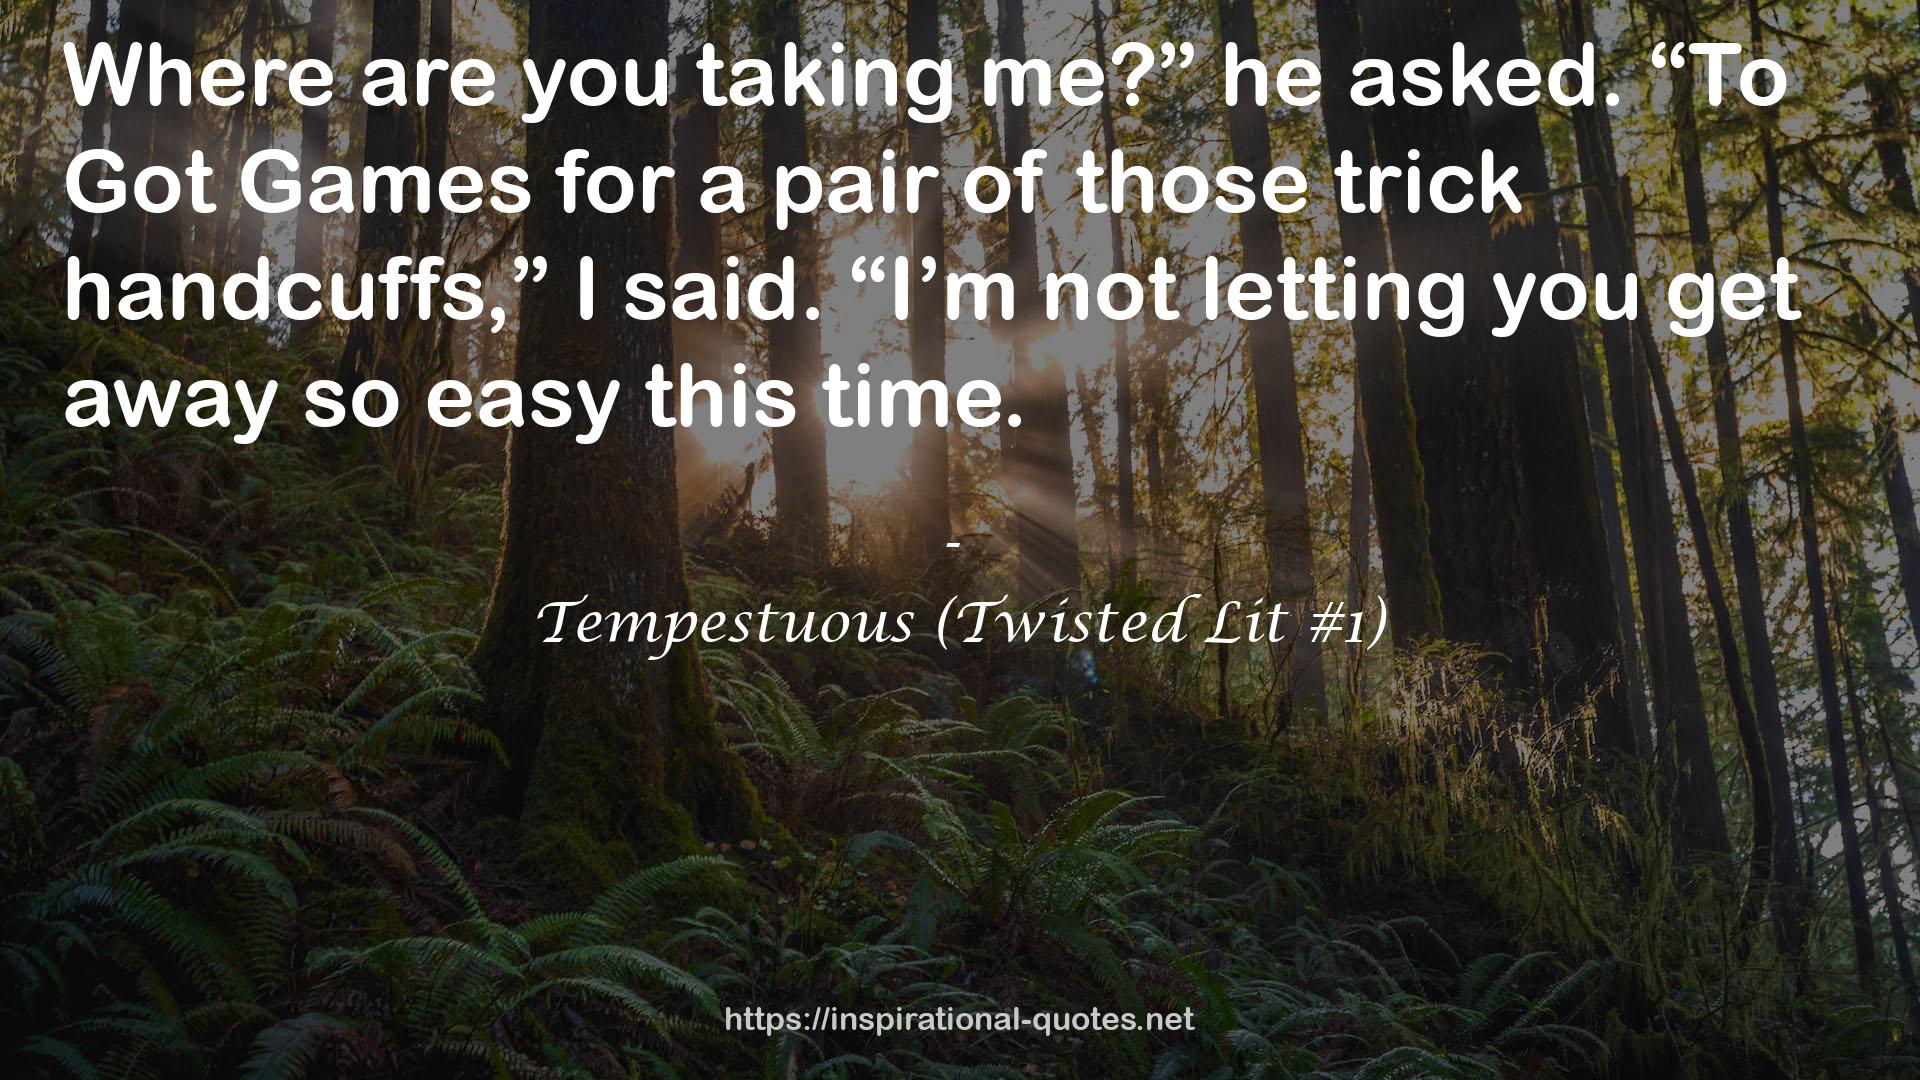 Tempestuous (Twisted Lit #1) QUOTES